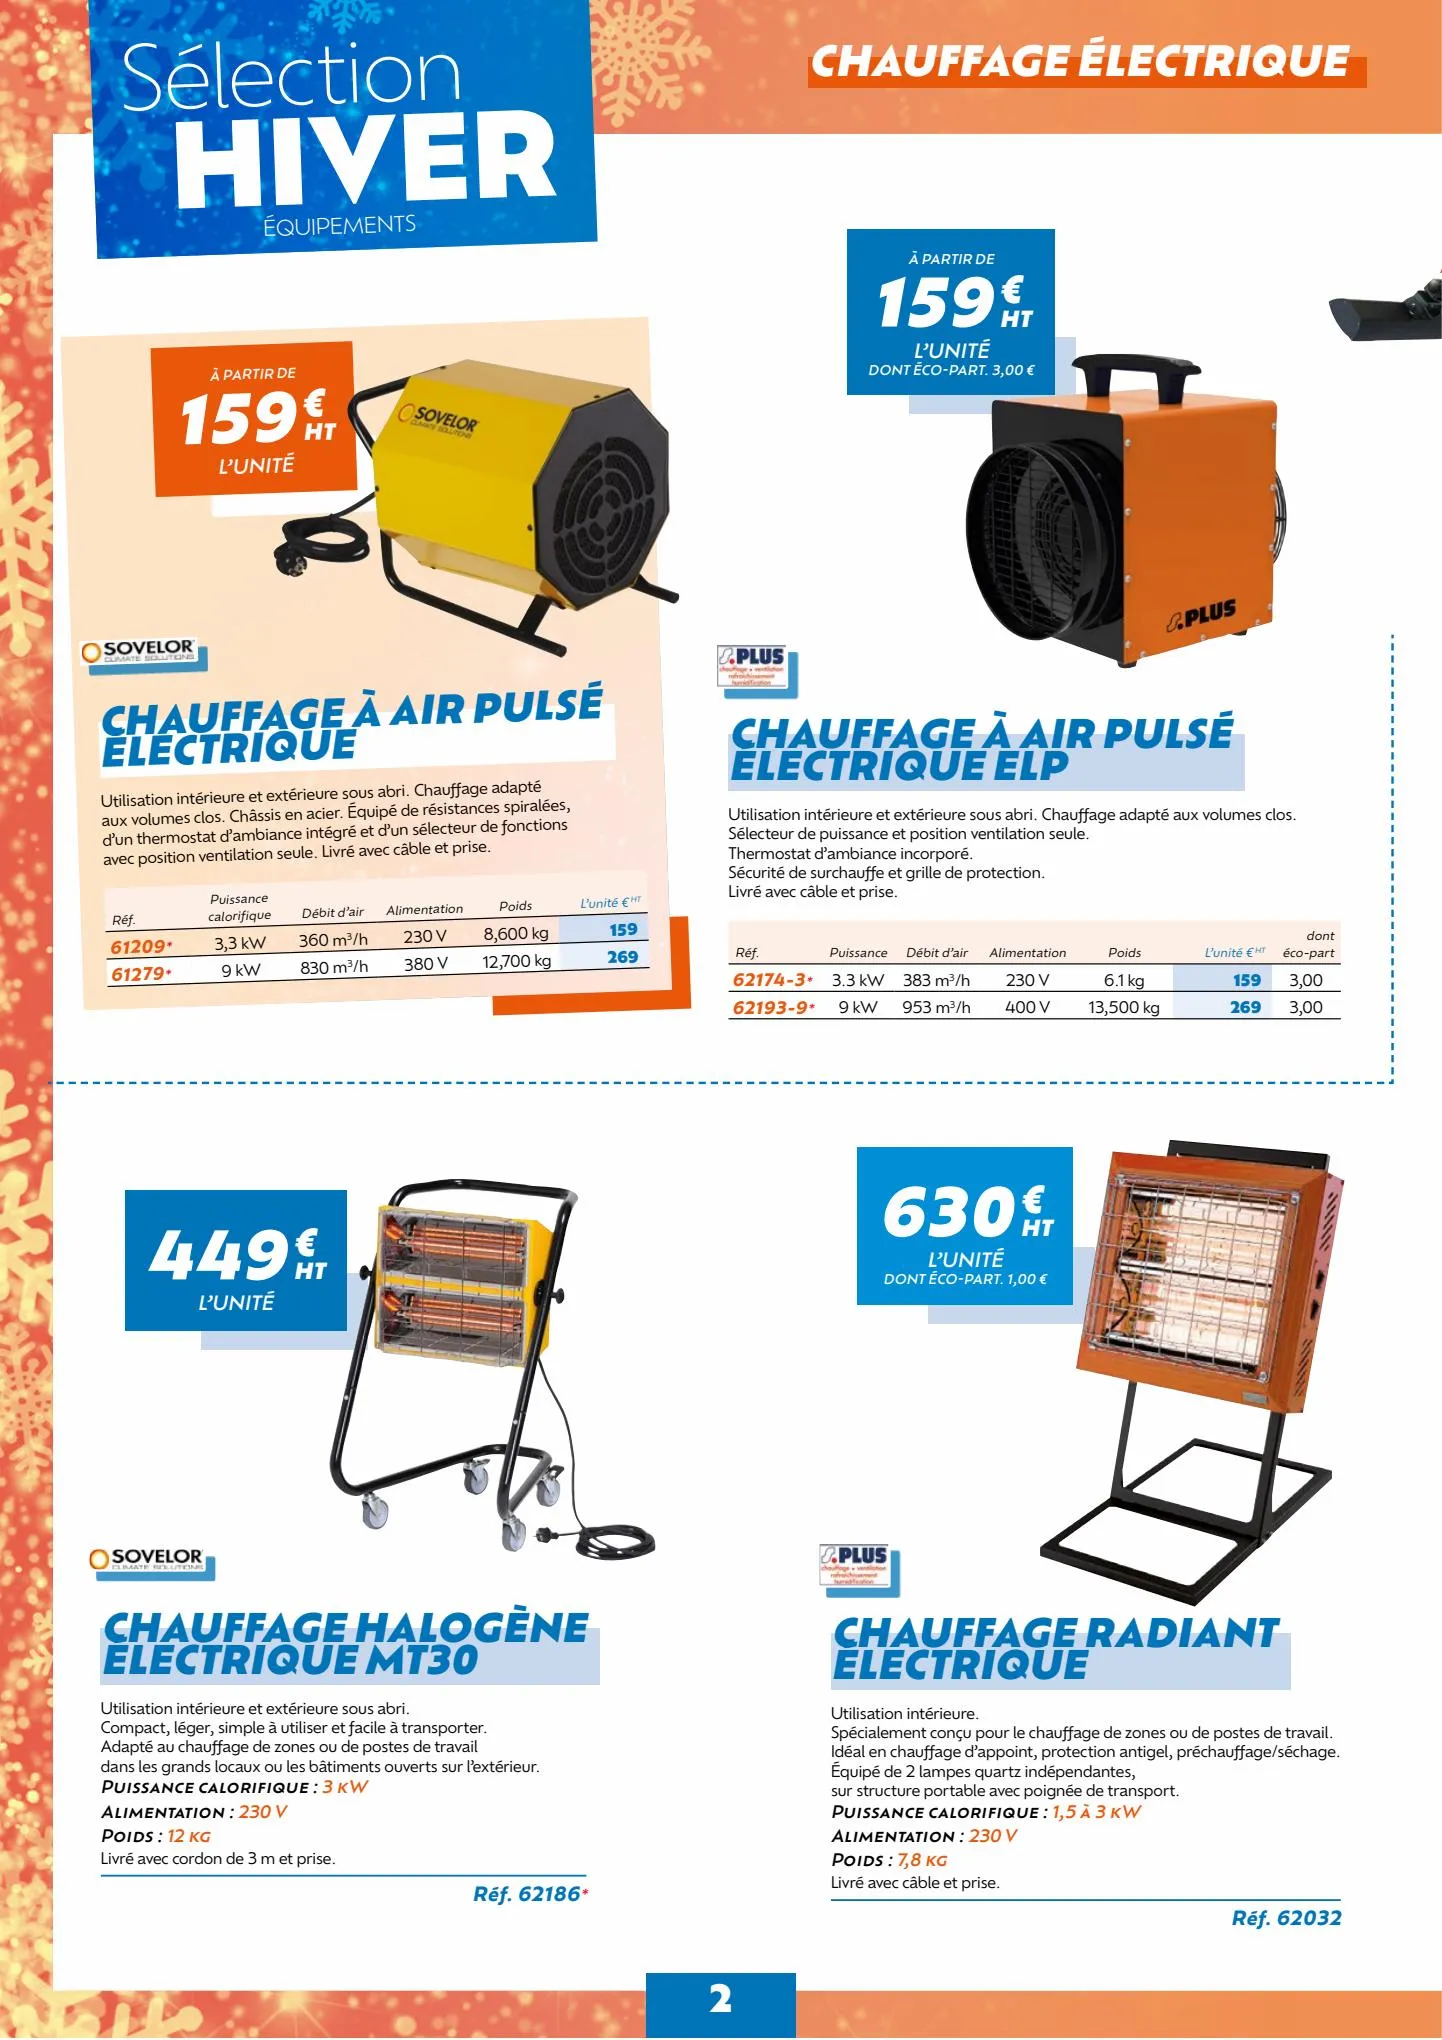 Catalogue Selection hiver 2022 equipements, page 00002